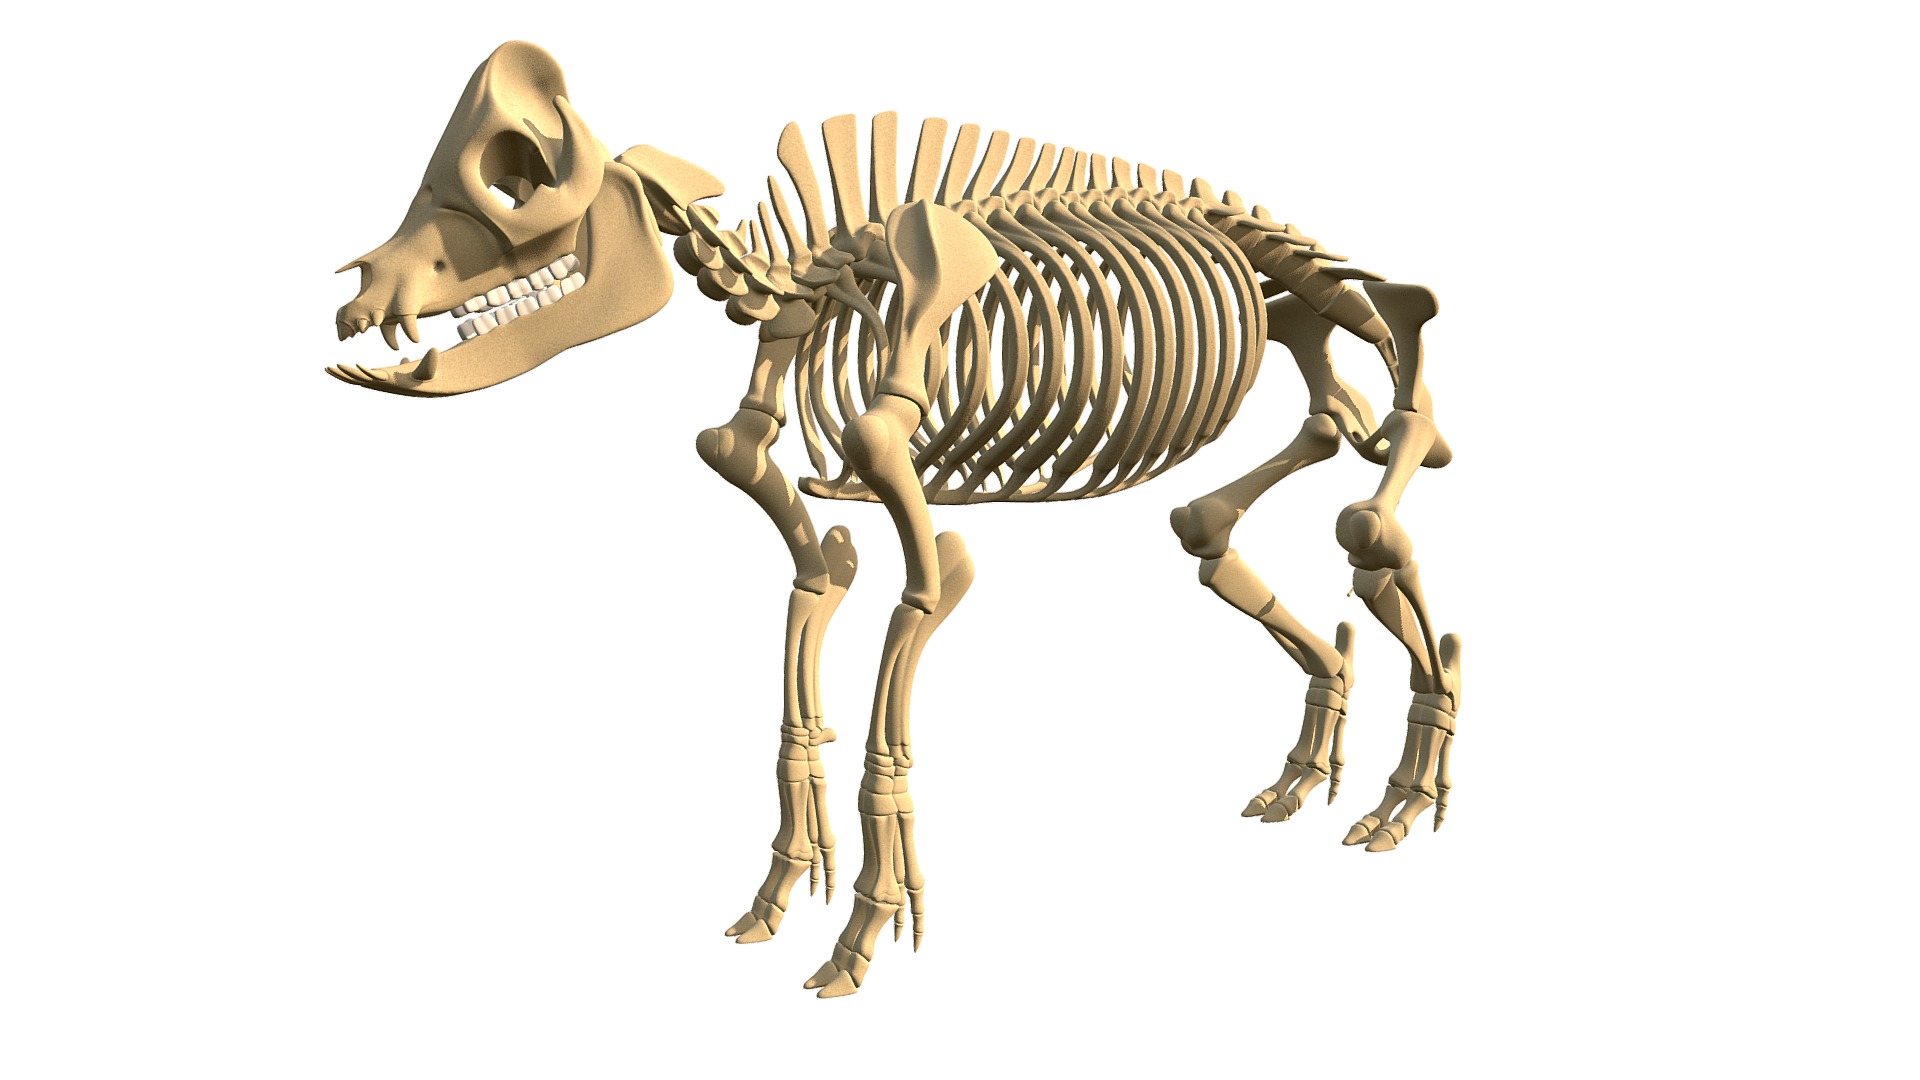 3D model Pig Skeleton - This is a 3D model of the Pig Skeleton. The 3D model is about a skeleton of a dinosaur.